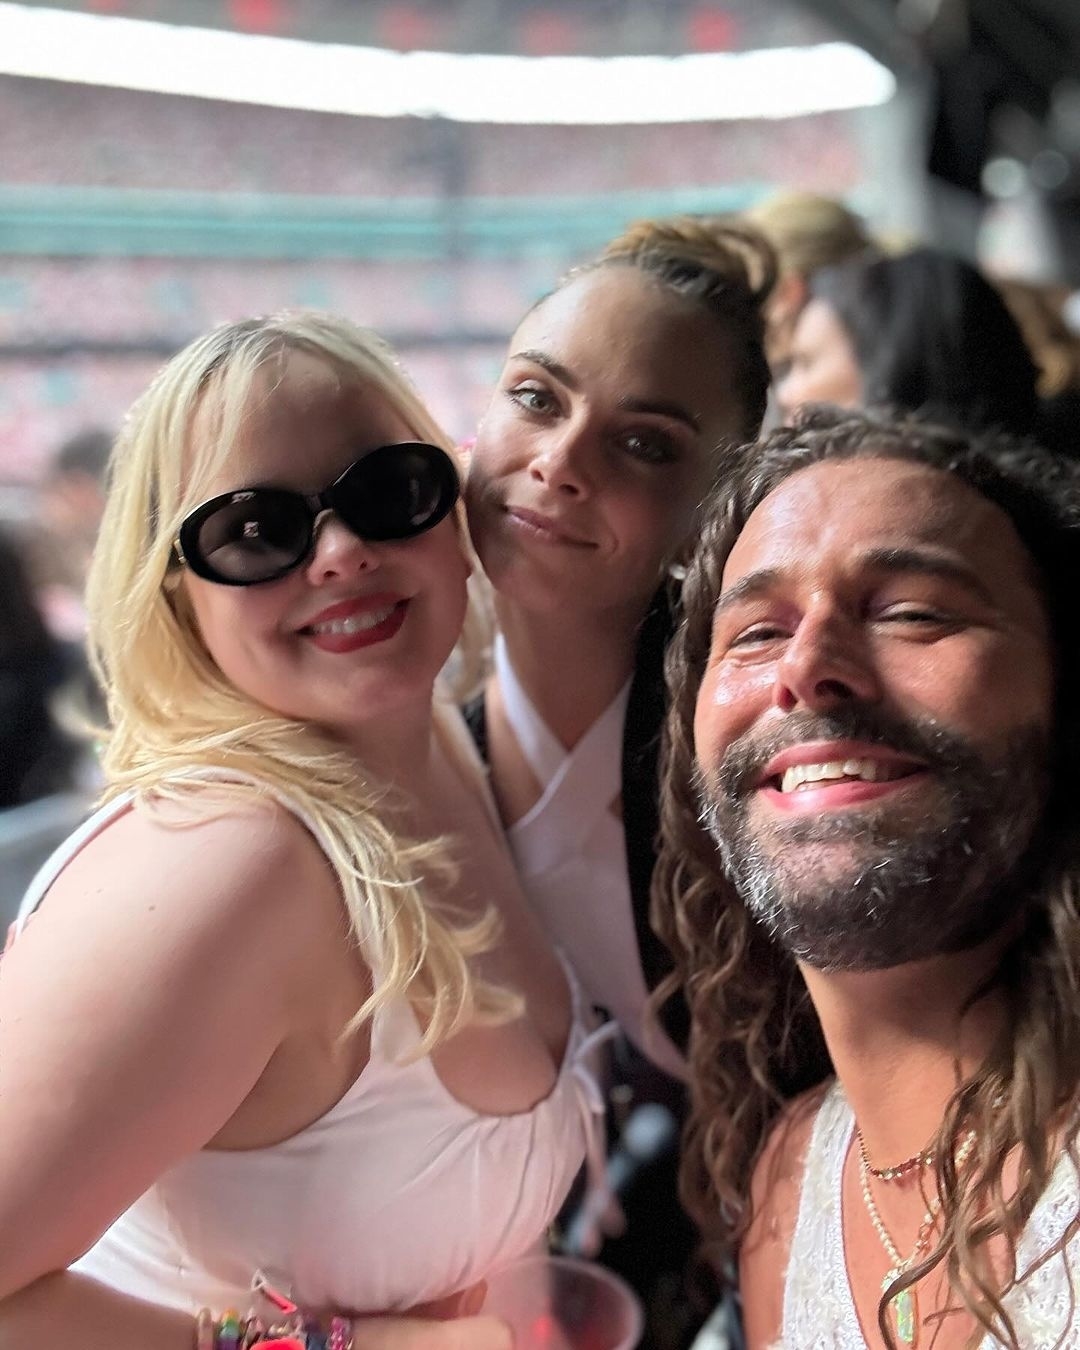 Jonathan Van Ness, Nicola Coughlan, and Cara Delevingne pose together at an event, all three smiling. Nicola wears black sunglasses, and Jonathan has long hair